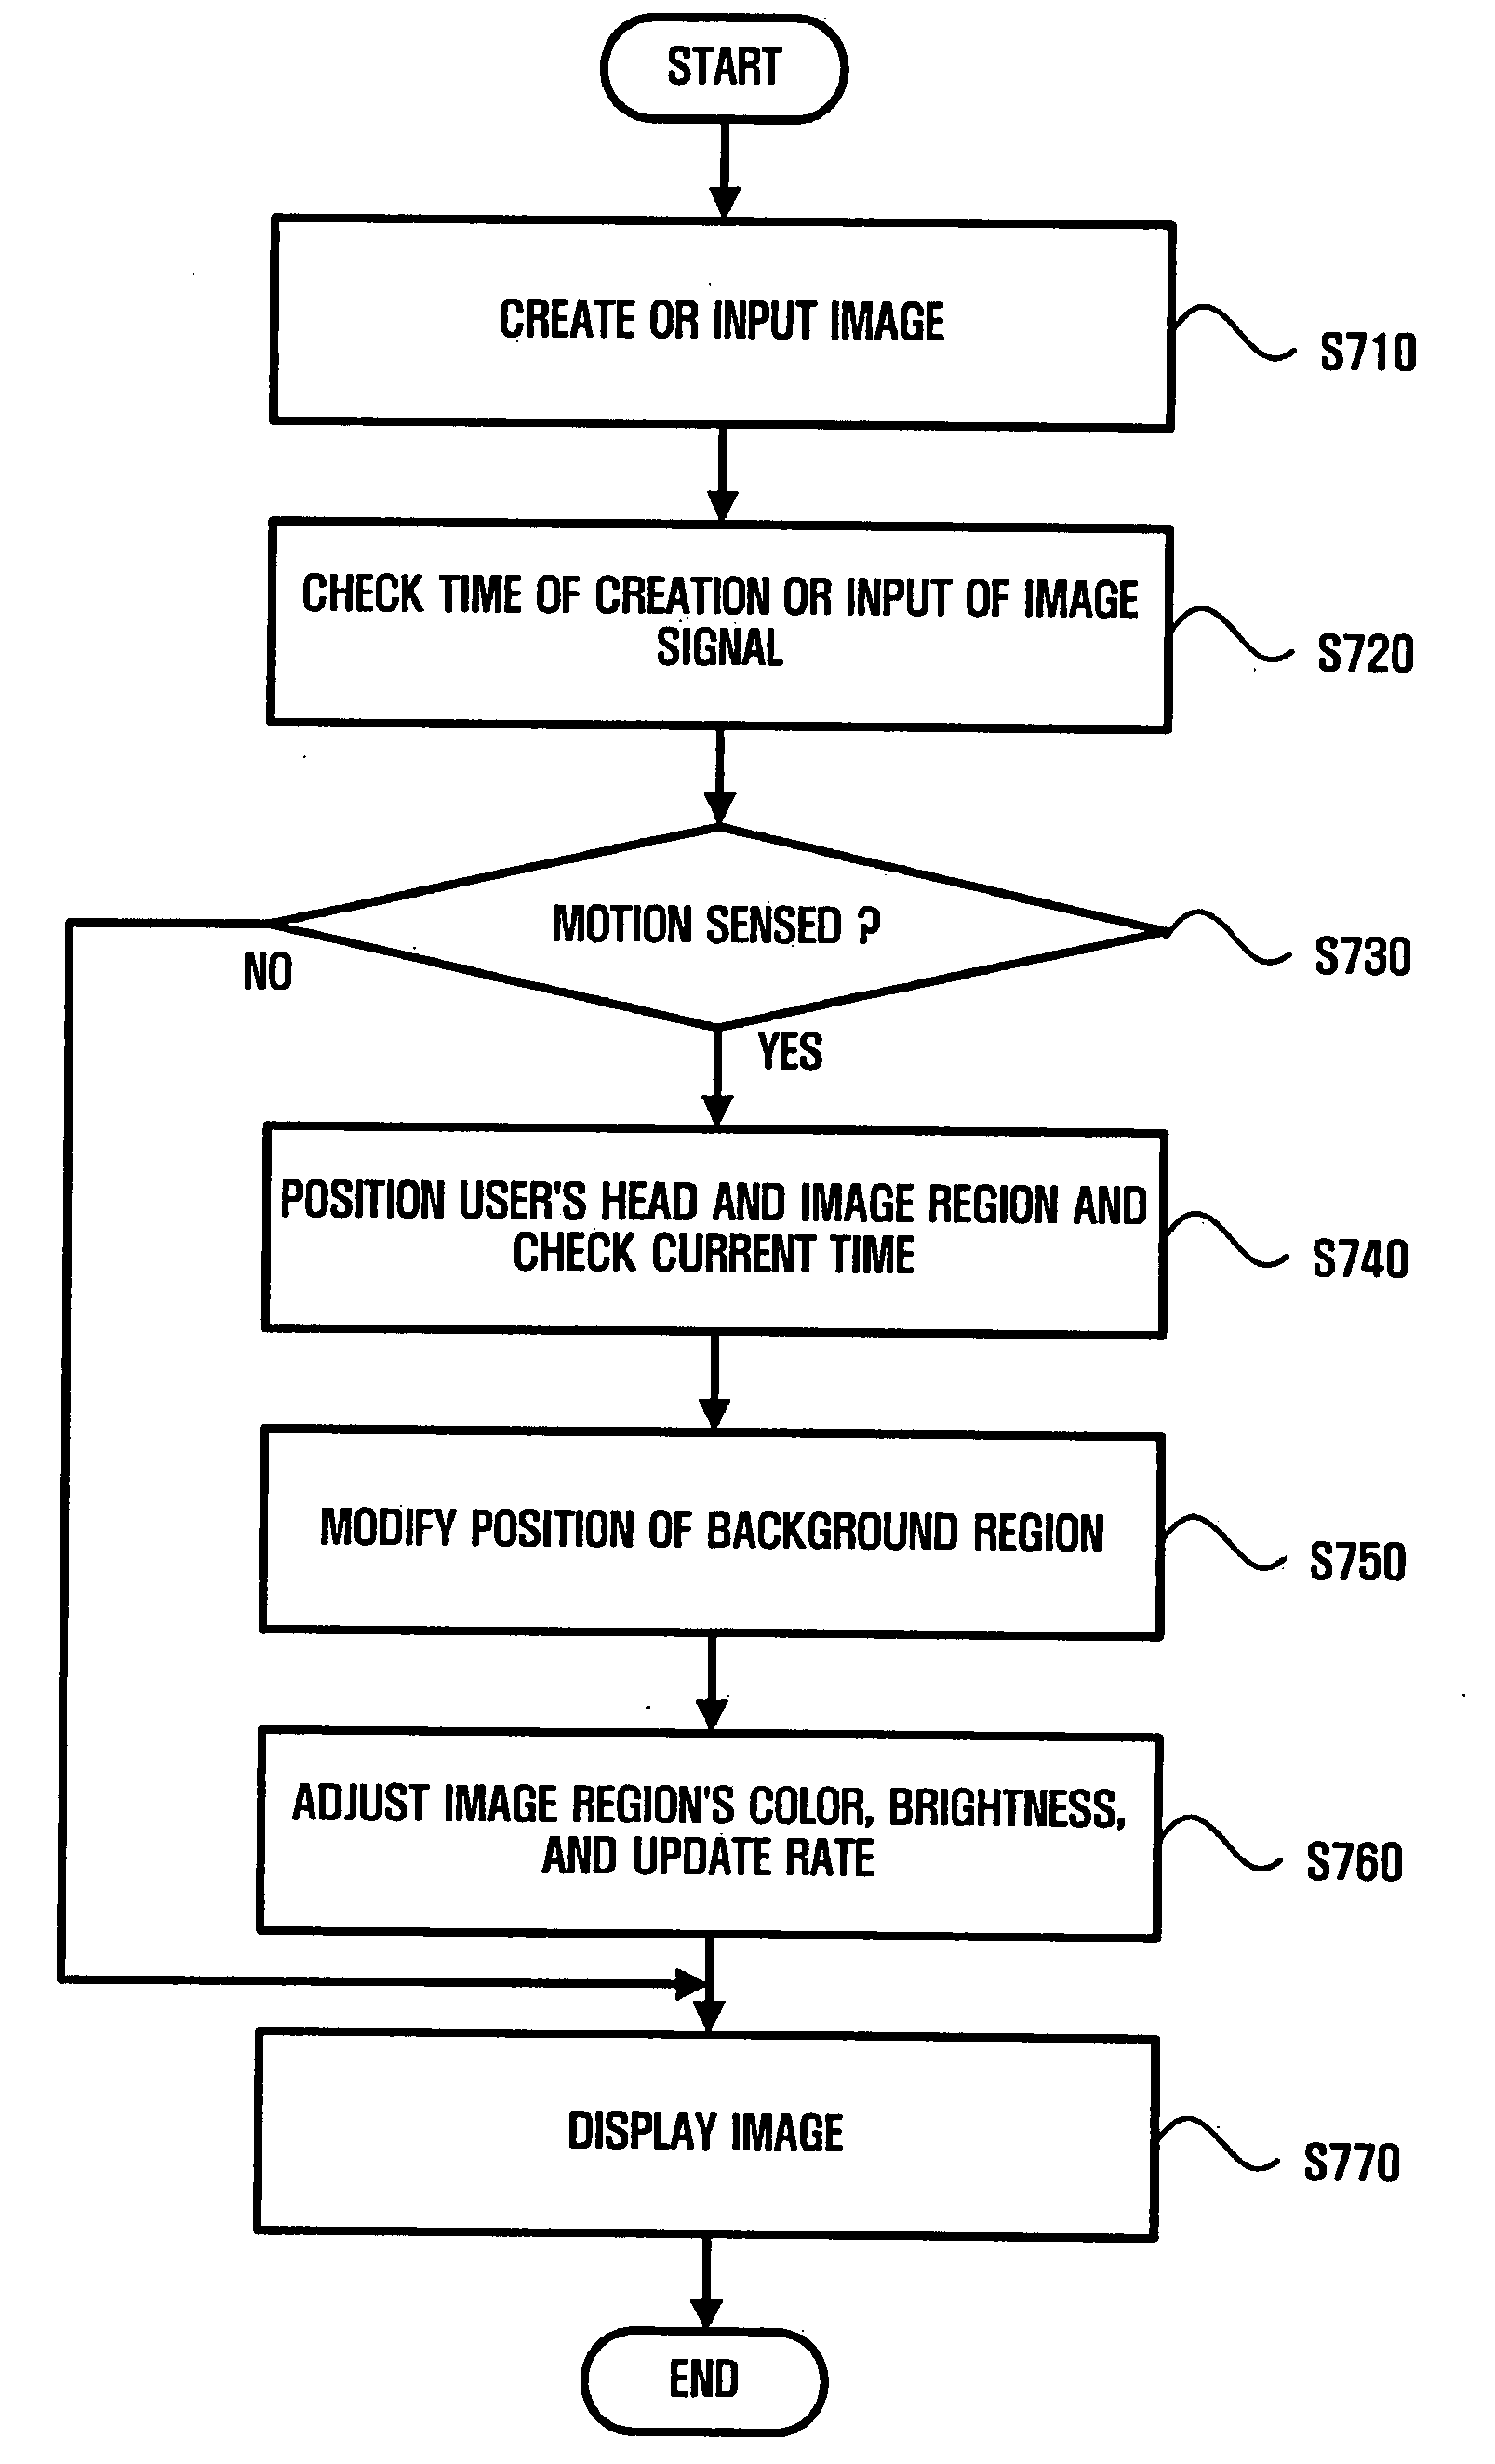 Apparatus, method, and medium for displaying content according to motion